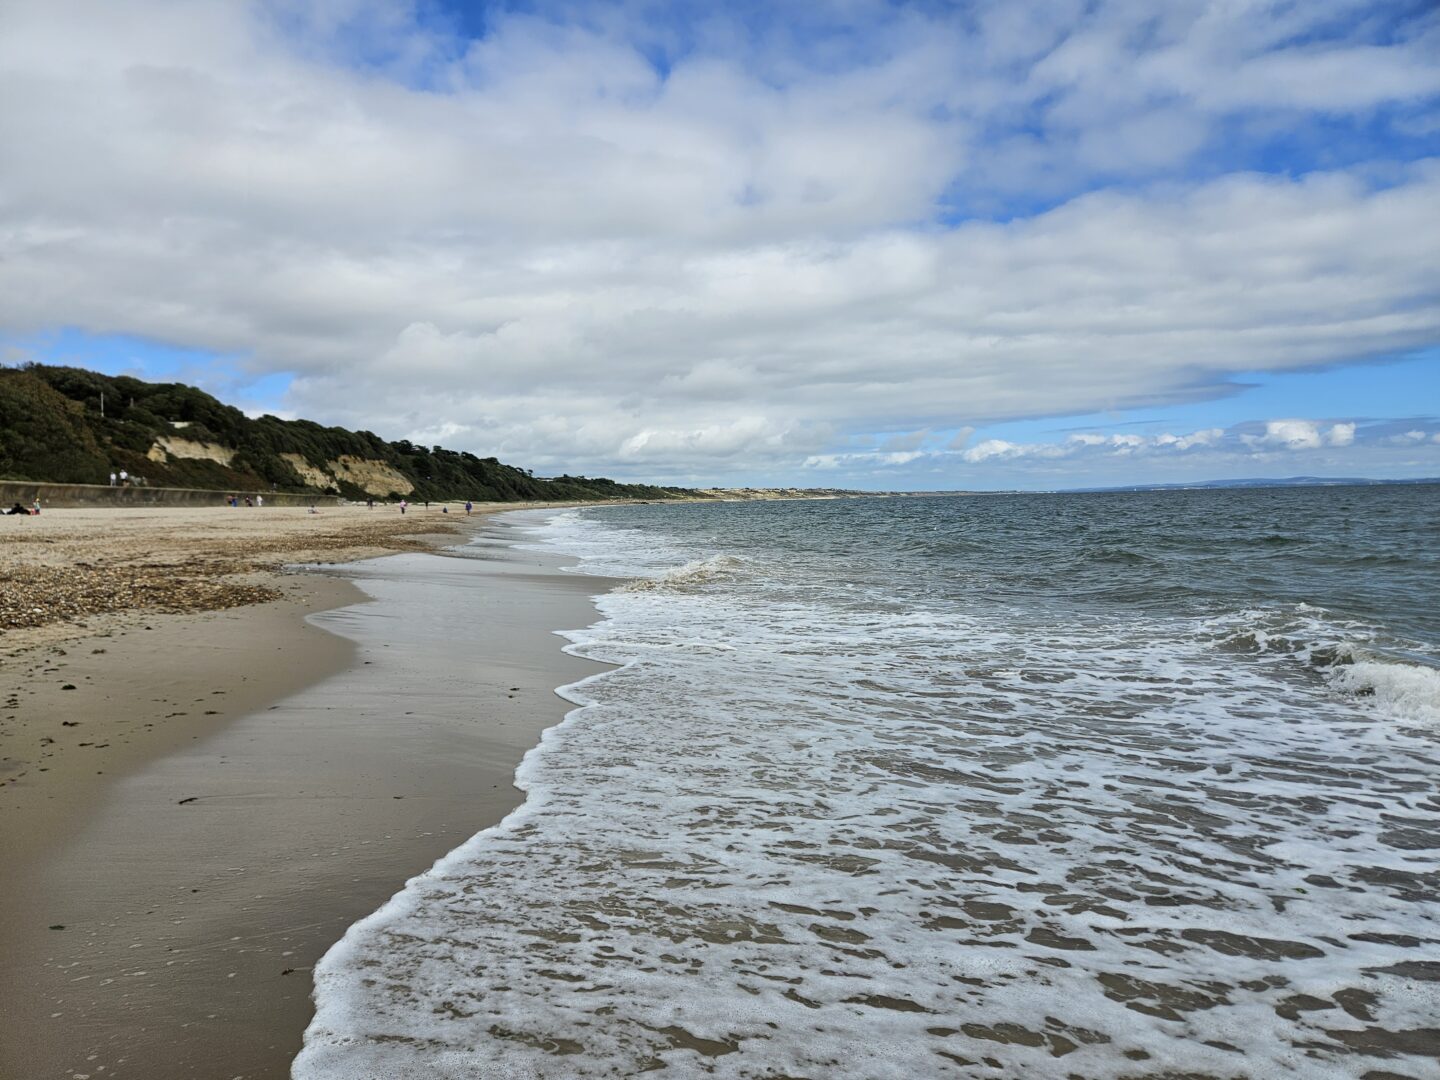 landscape photo of a UK beach with blue grey sea with white foam, sand, and blue skies with white clouds. 